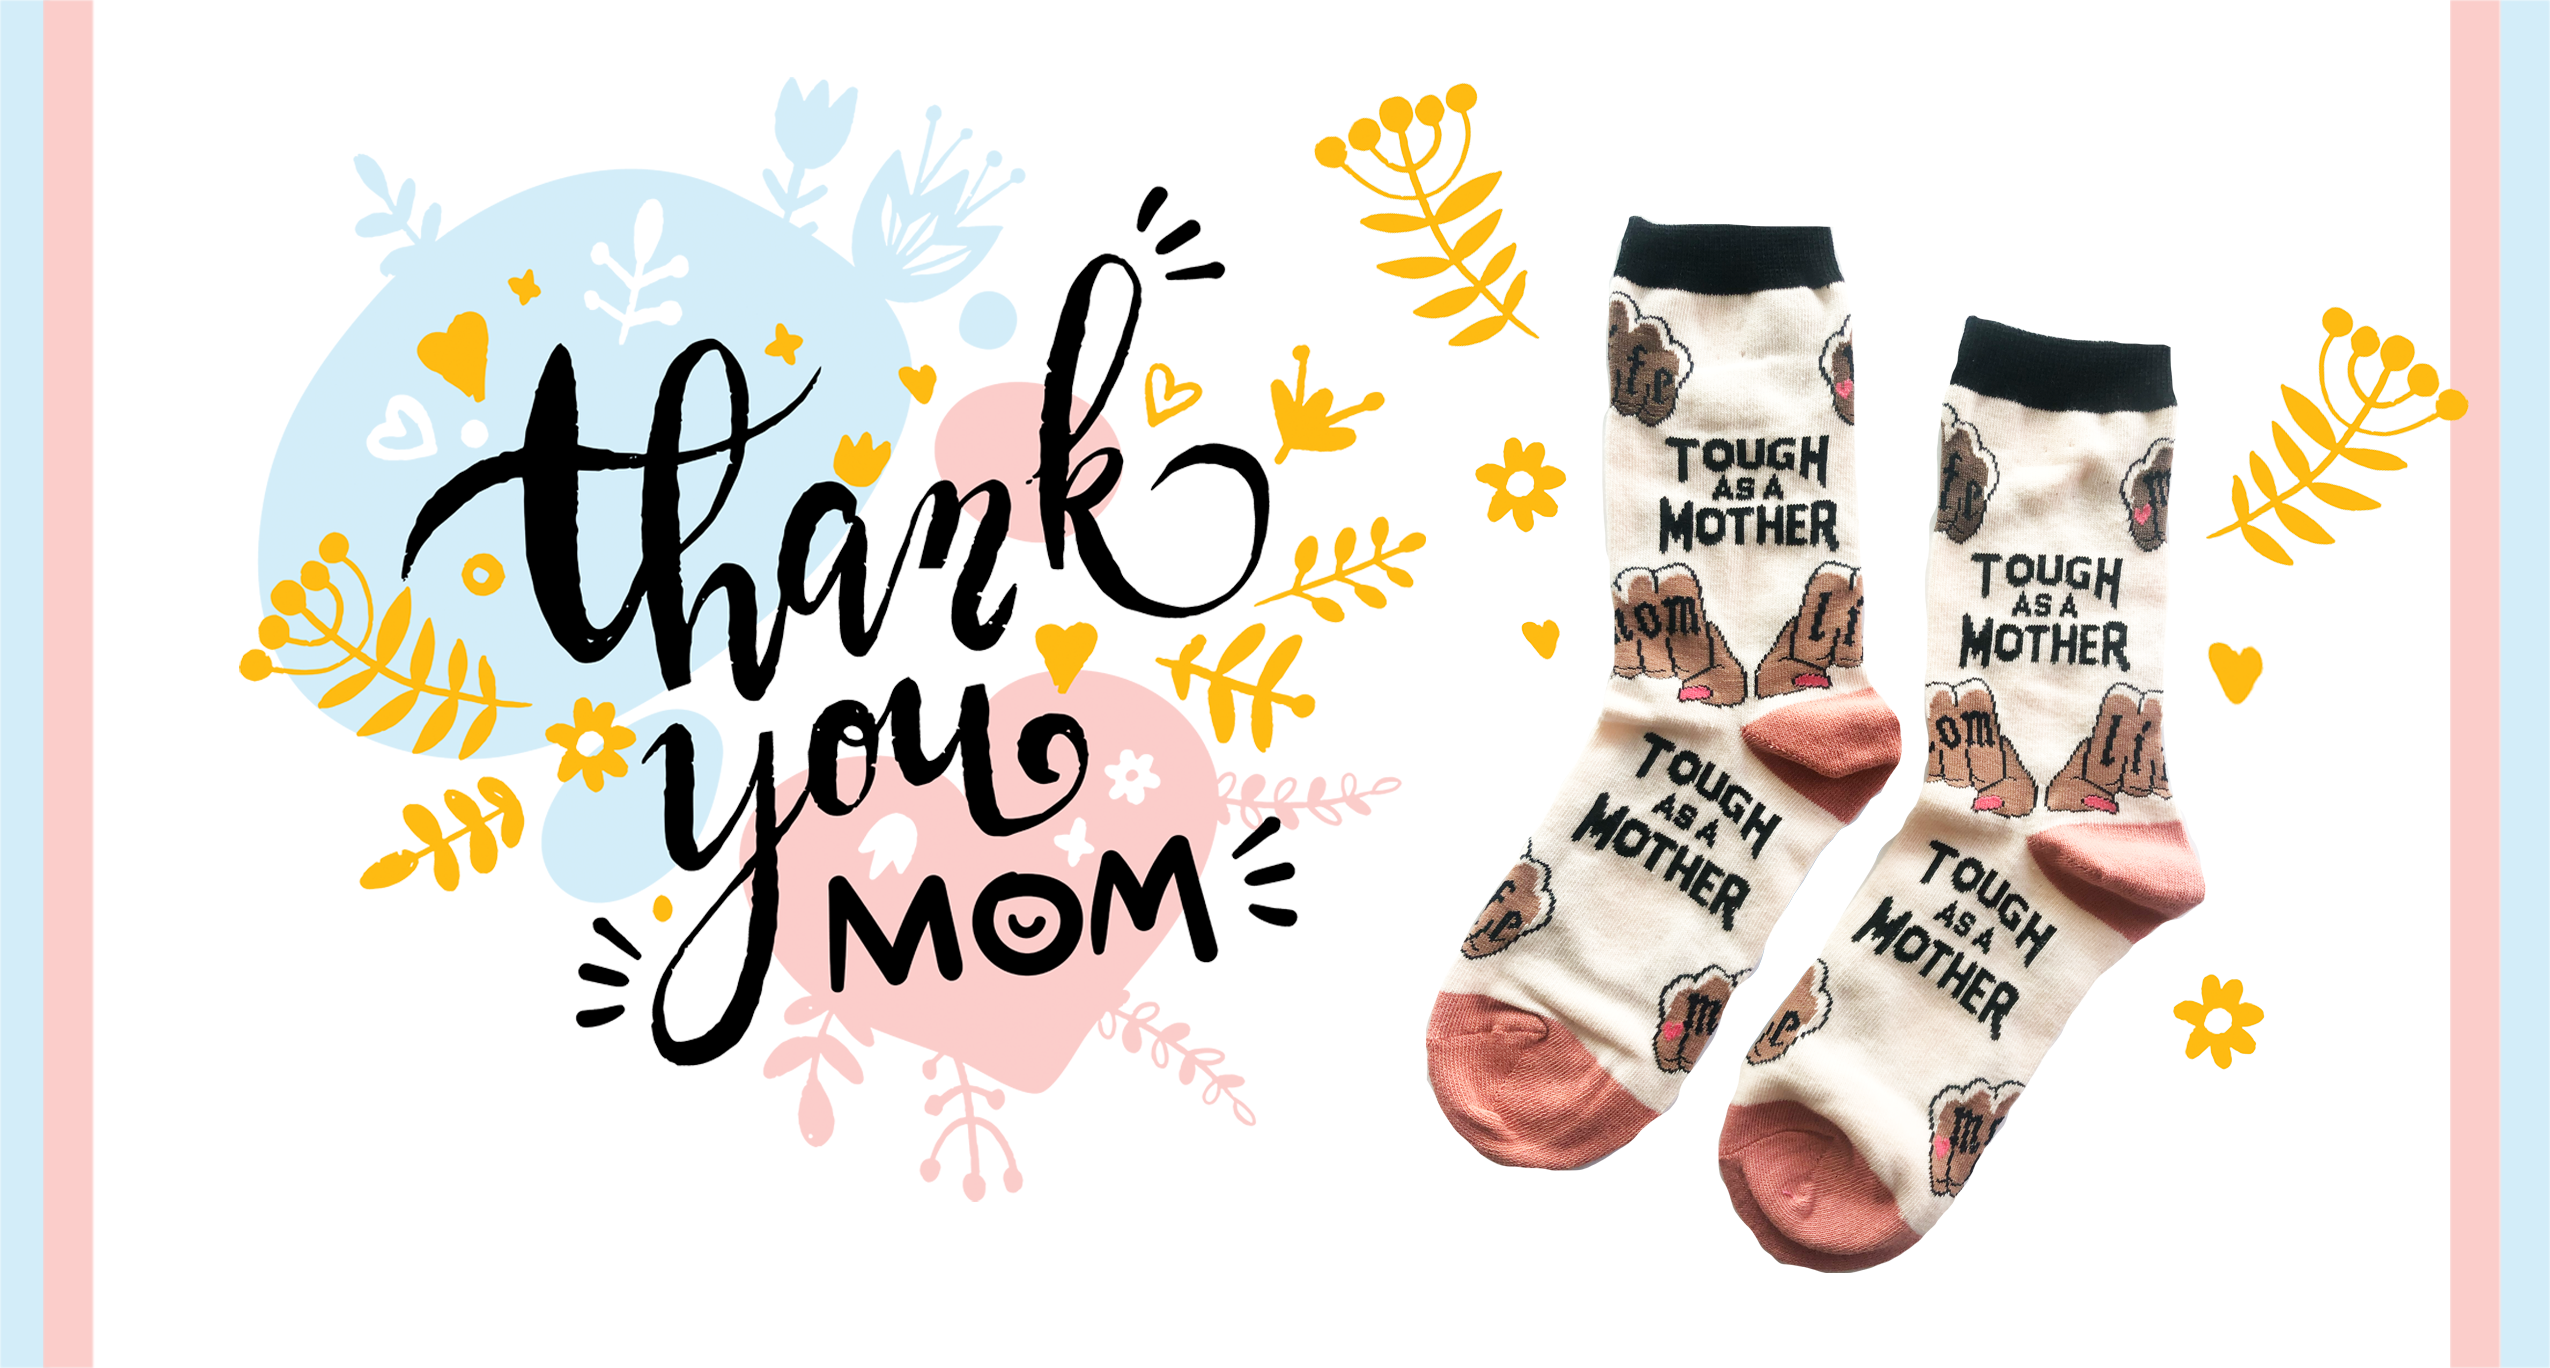 Top 4 Funny Socks and Slippers Mother's Day Gifts She'll Love